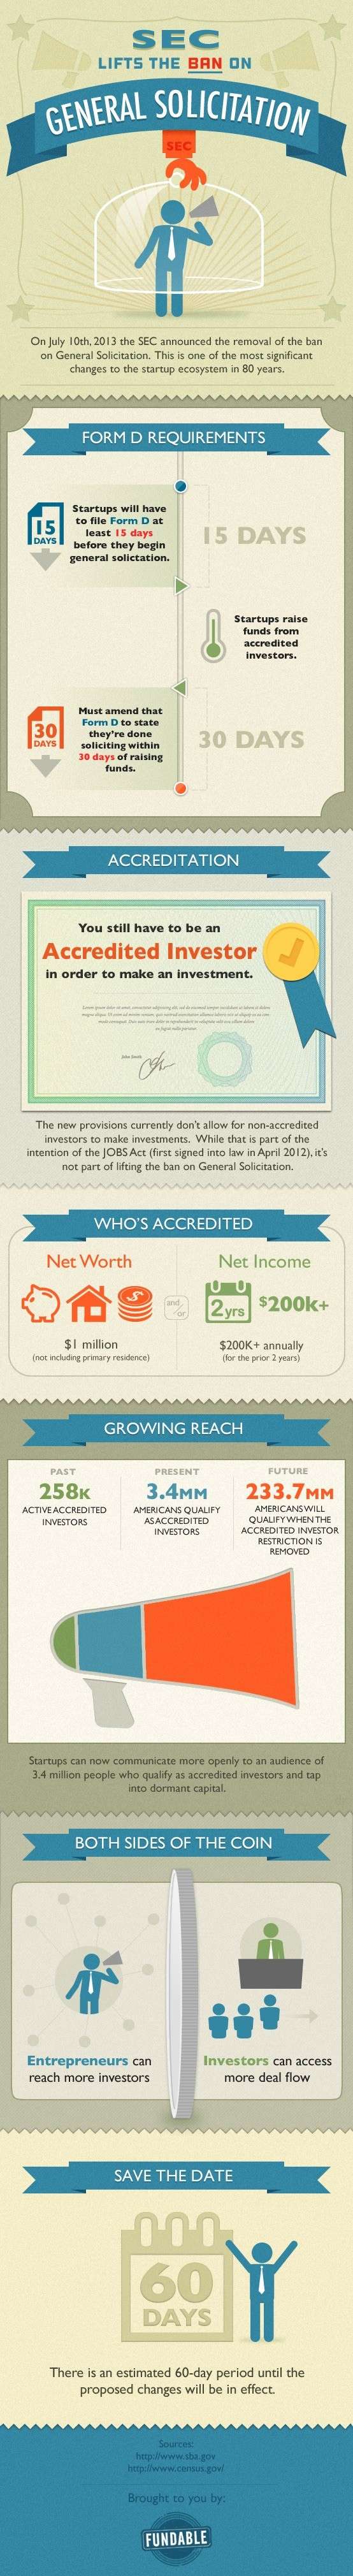 What You Need to Know About Raising Money After the SEC Ruling (Infographic) What-n10